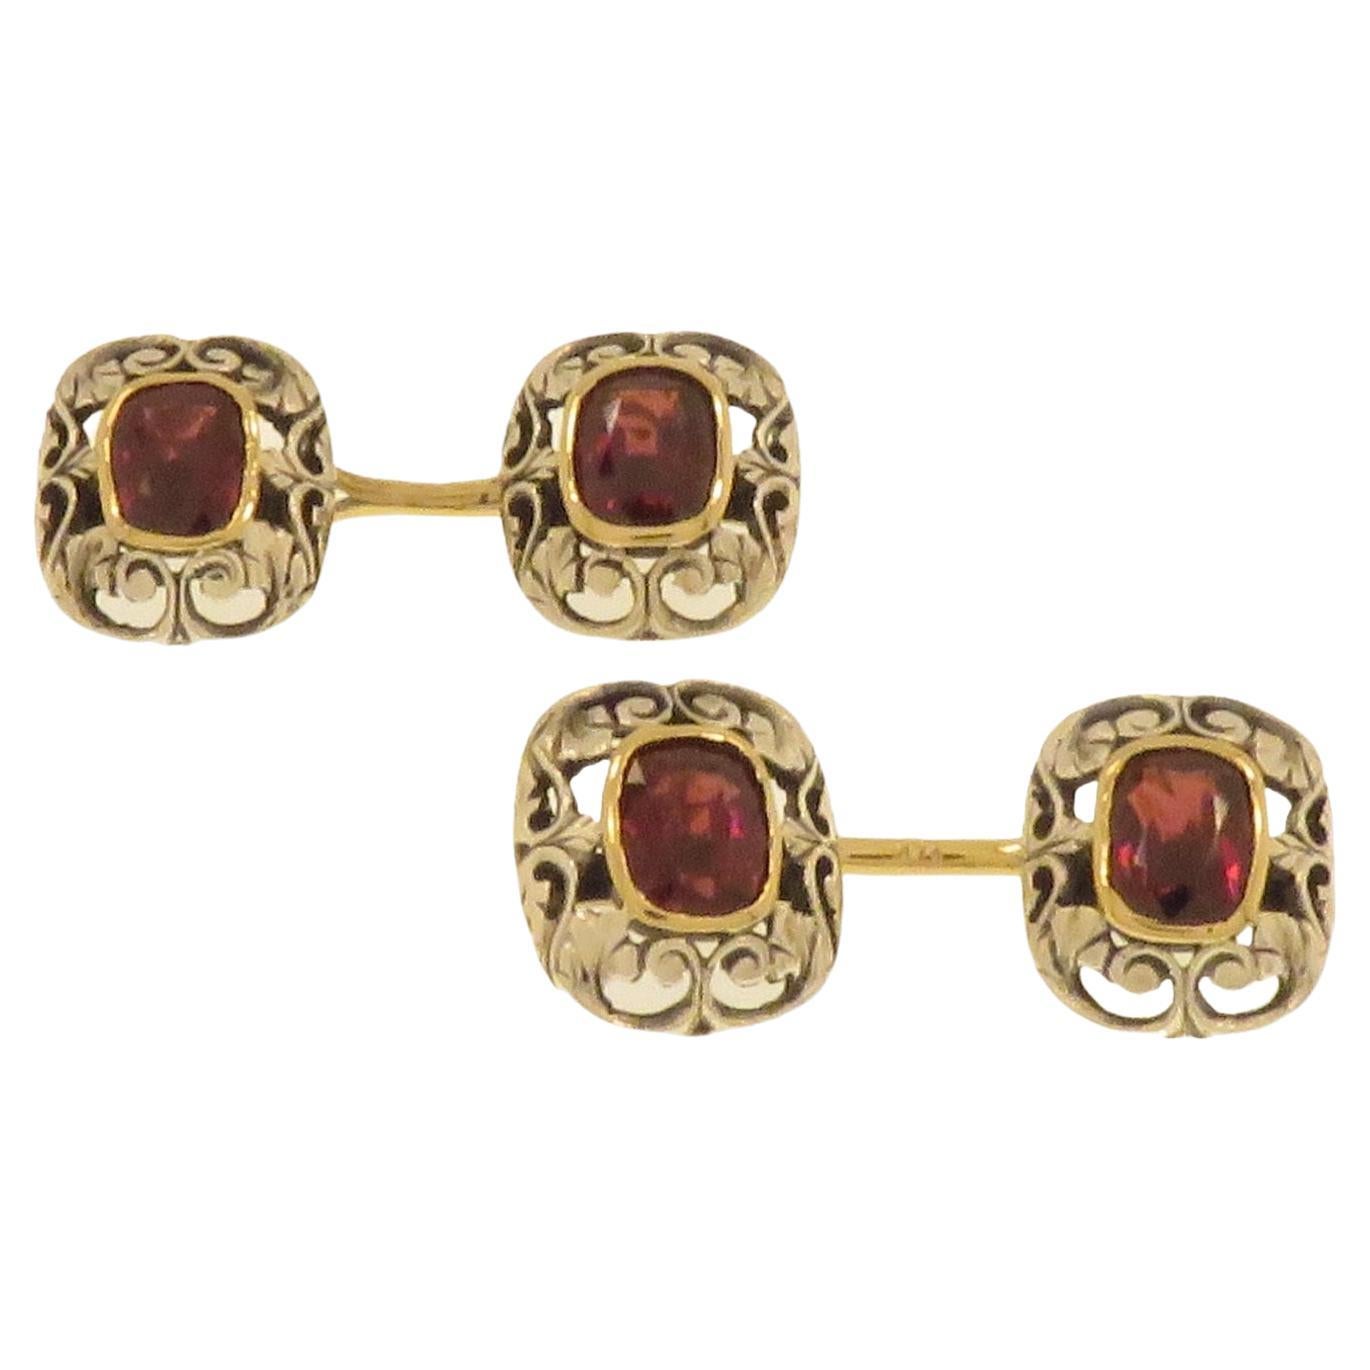 Antique Cufflinks with Garnets in Gold And Silver 1920s For Sale